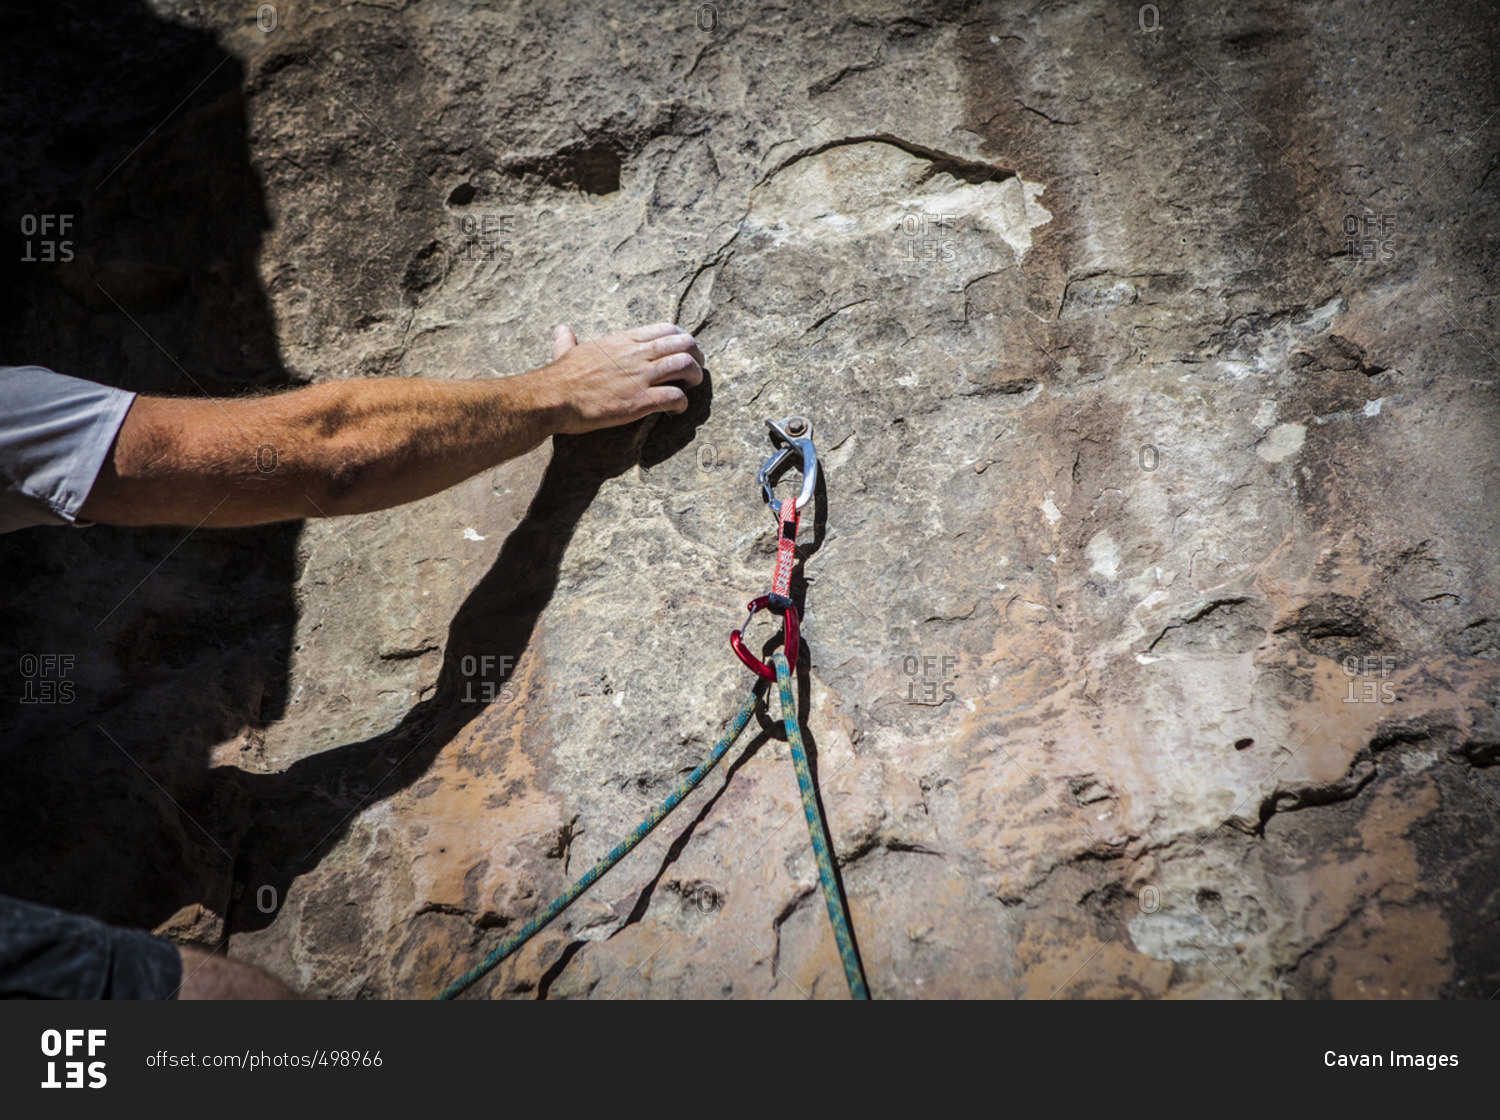 Cropped image of hand gripping while rock climbing